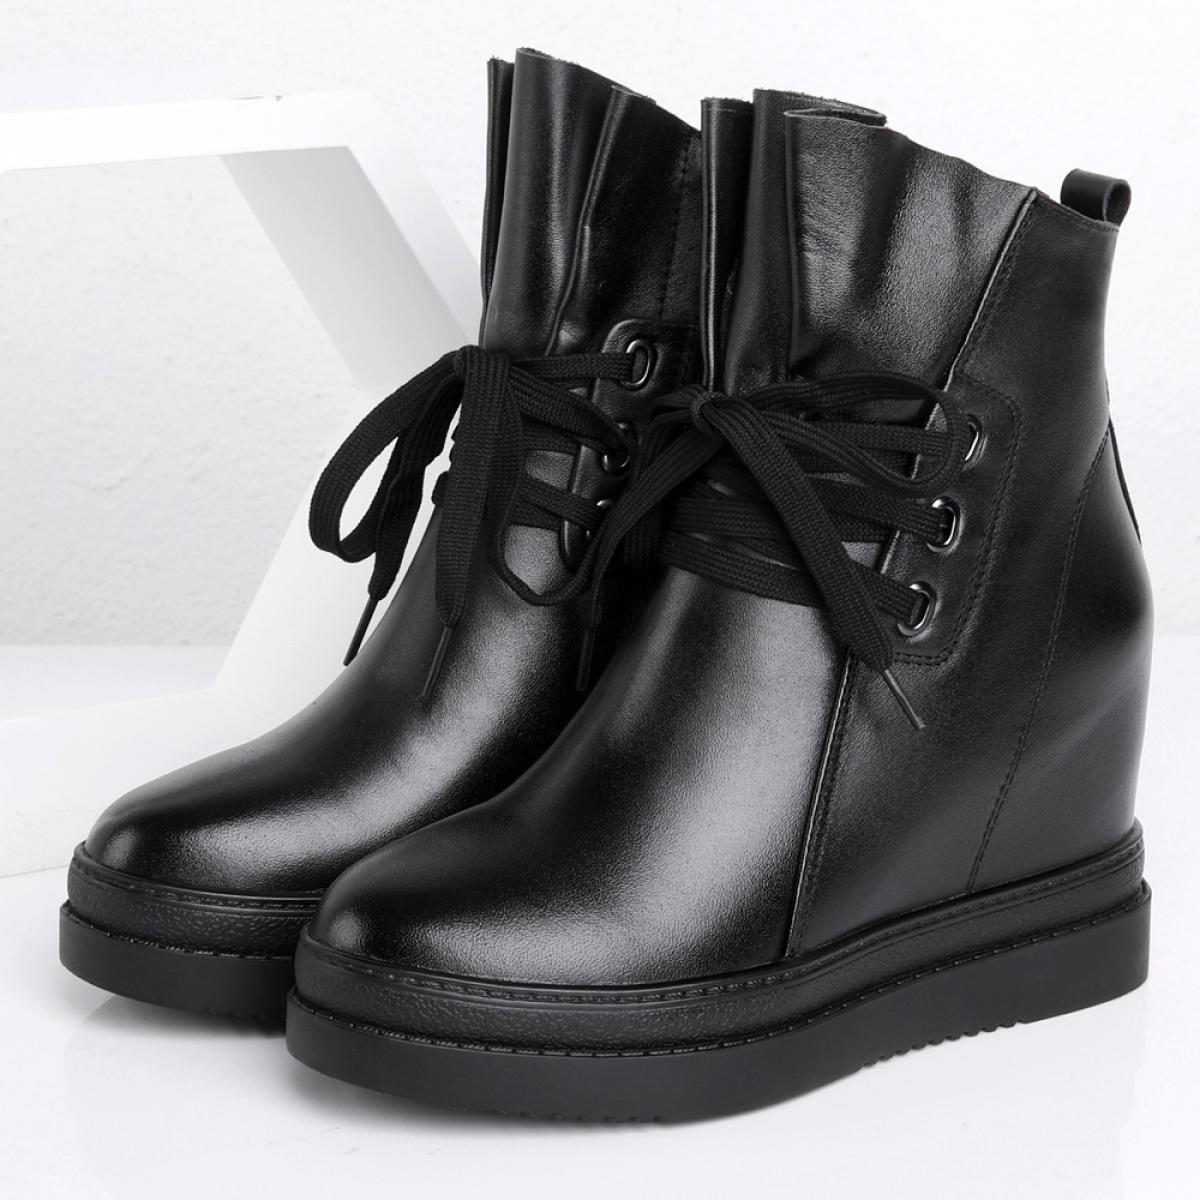 Autumn Winter Ankle Boots Women Wedges High Heels Platform Shoes Split Leather Ladies Thick Heeled Designer Shoes Female